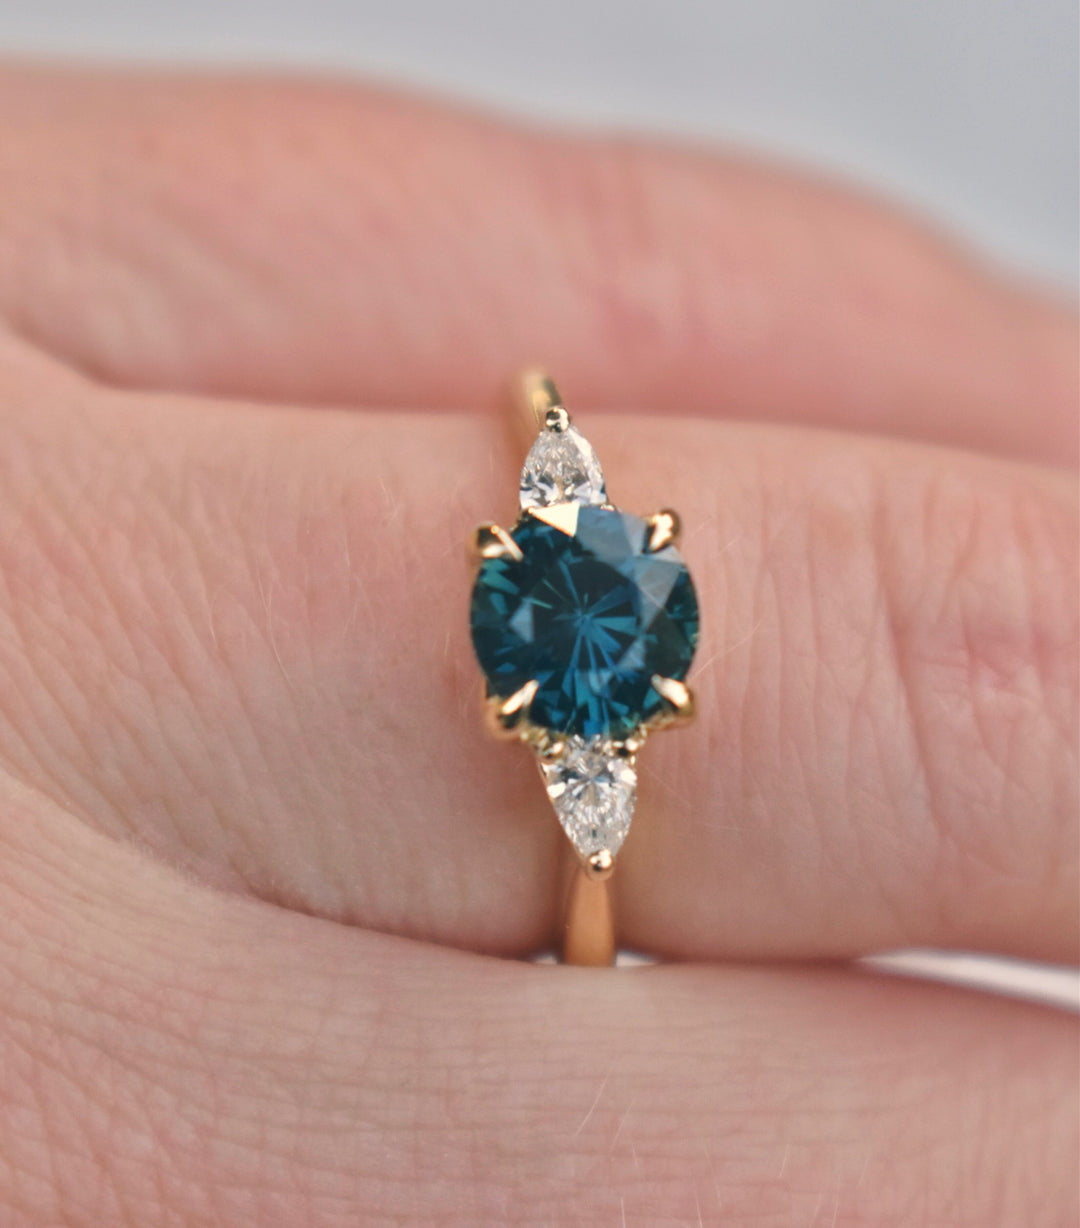 Teal Sapphire Engagement Ring with Pear Shape Diamonds 14K Gold